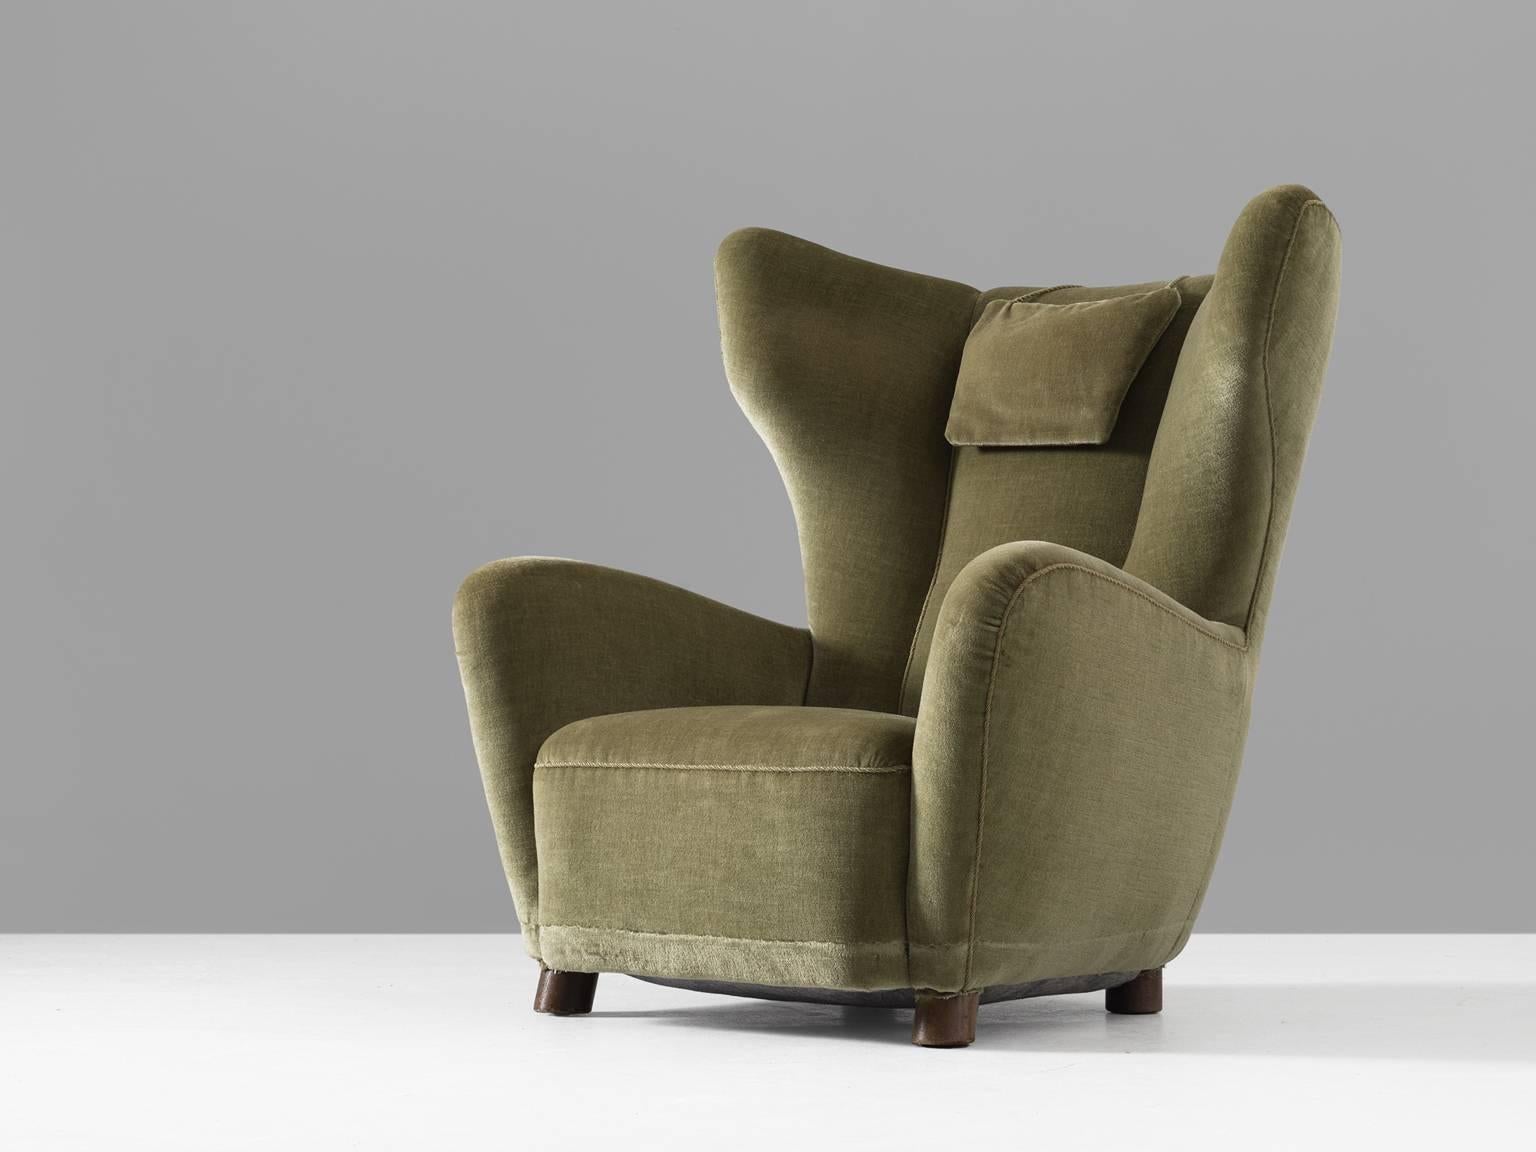 Danish lounge chair, green velvet, 1950s.

This extraordinary wing back chair is from Danish origin. The chair embraces the sitter thanks to its sculpted corners and arm rests. The legs of the chair are made from wood. This chair has the style of